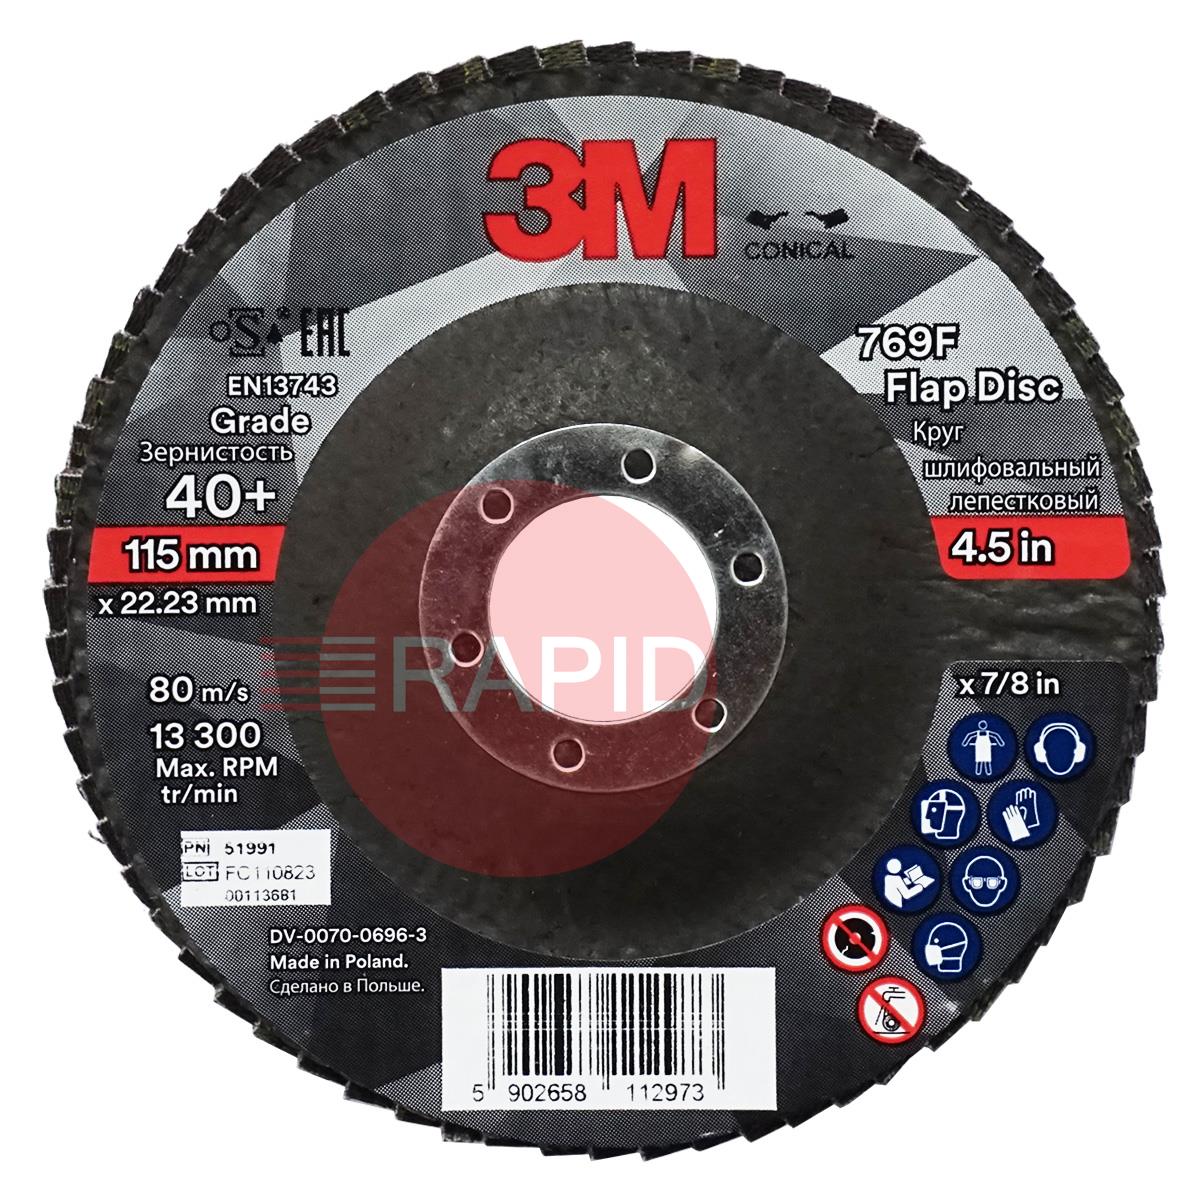 3M-51991  3M Silver Conical Flap Disc 769F 115mm x 22.23mm, 40+ Grit (Box of 10)